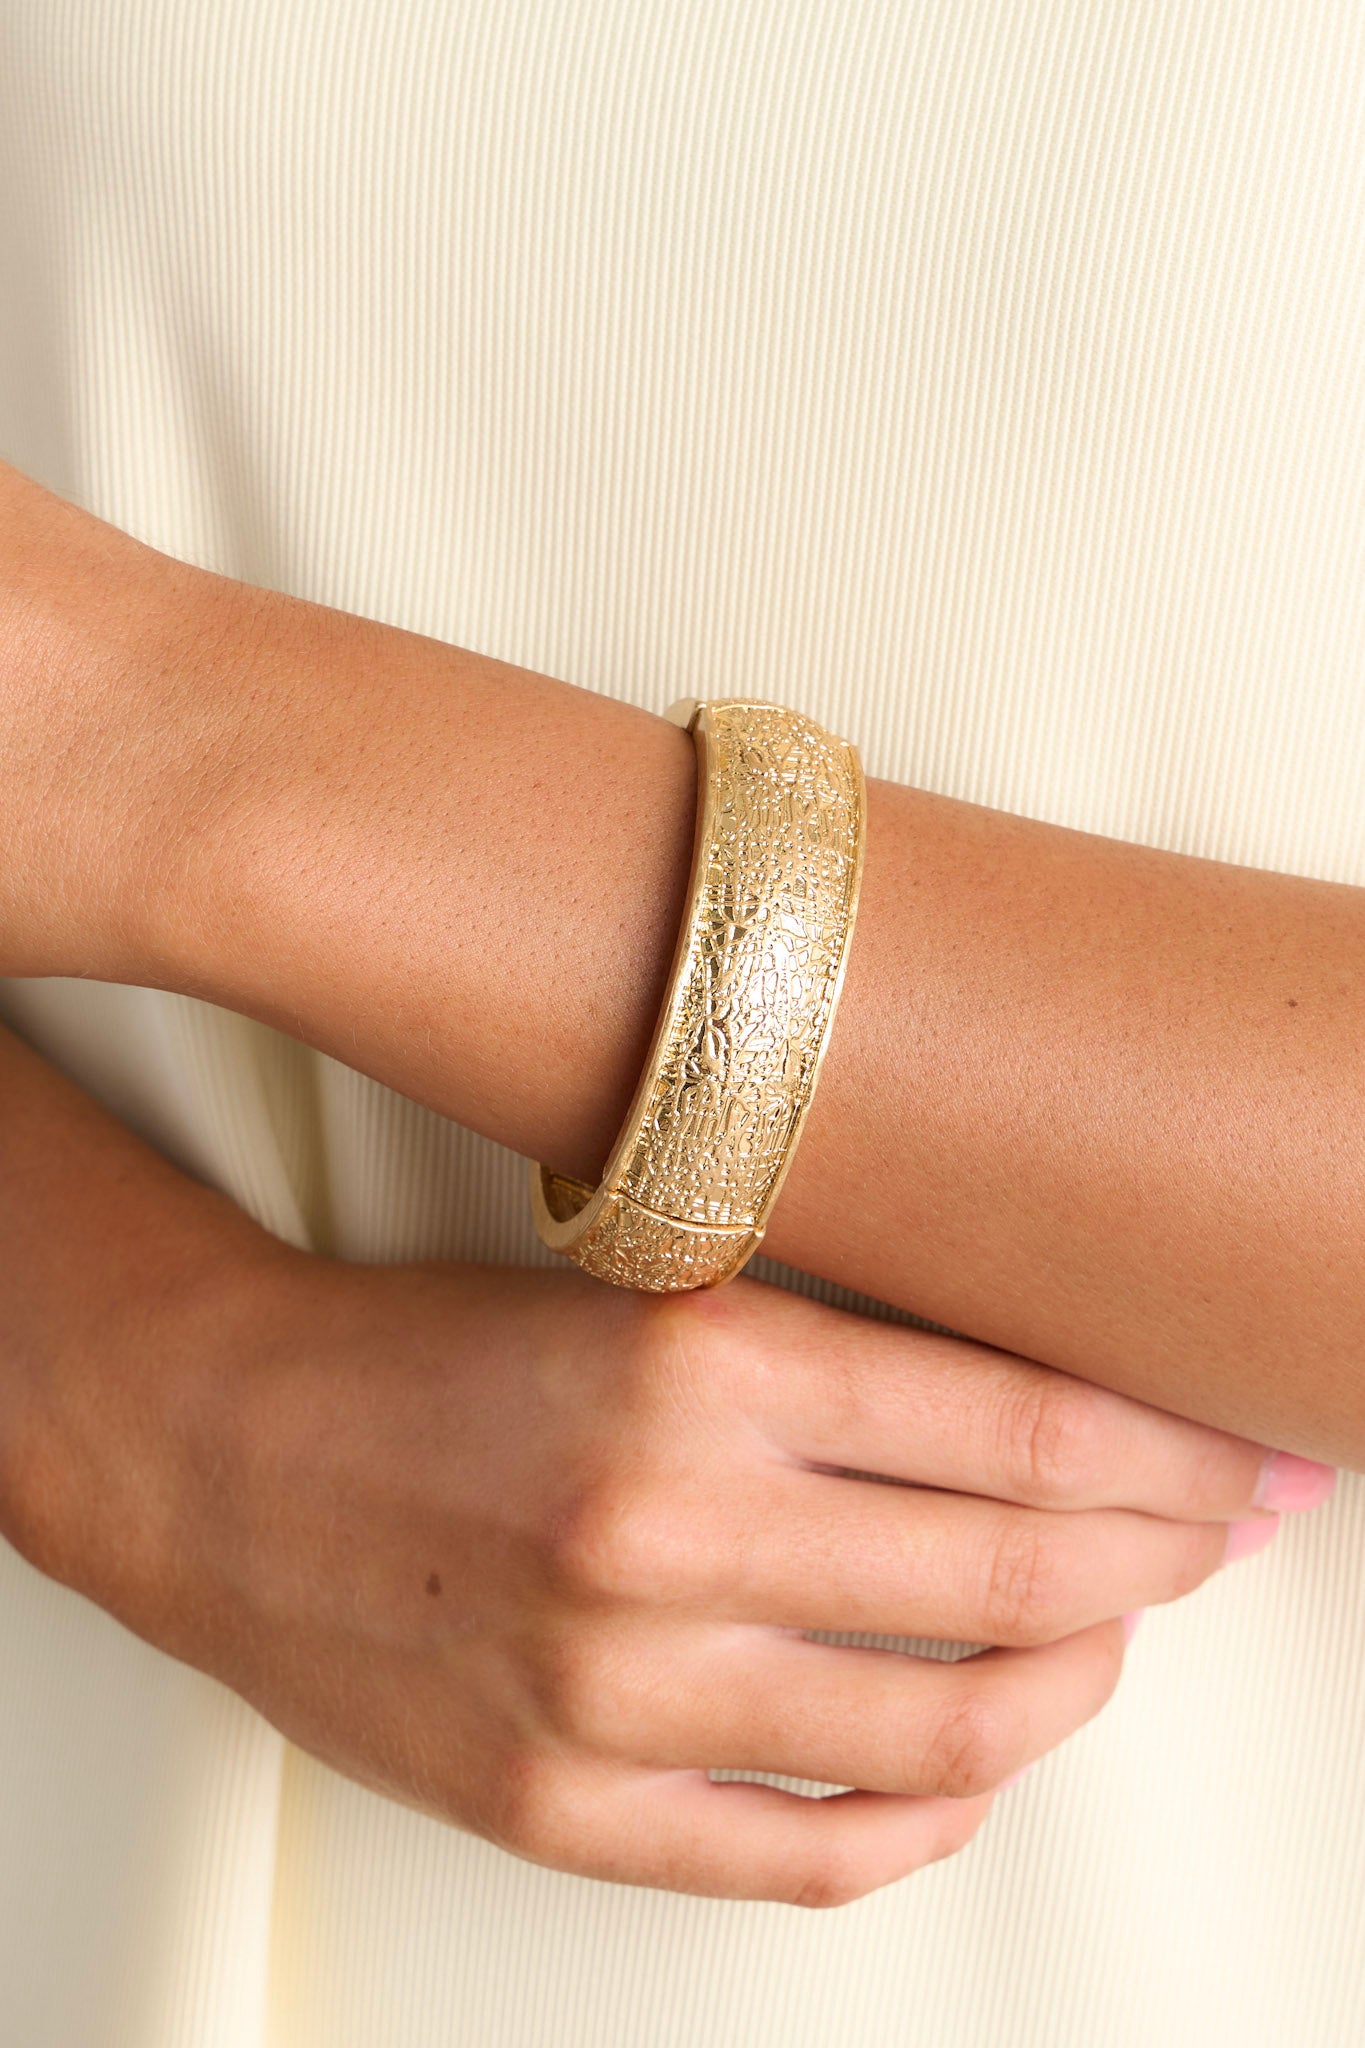 Close-up view of this gold bracelet that features a heavily textured material, and elastic bands underneath to accommodate stretch.